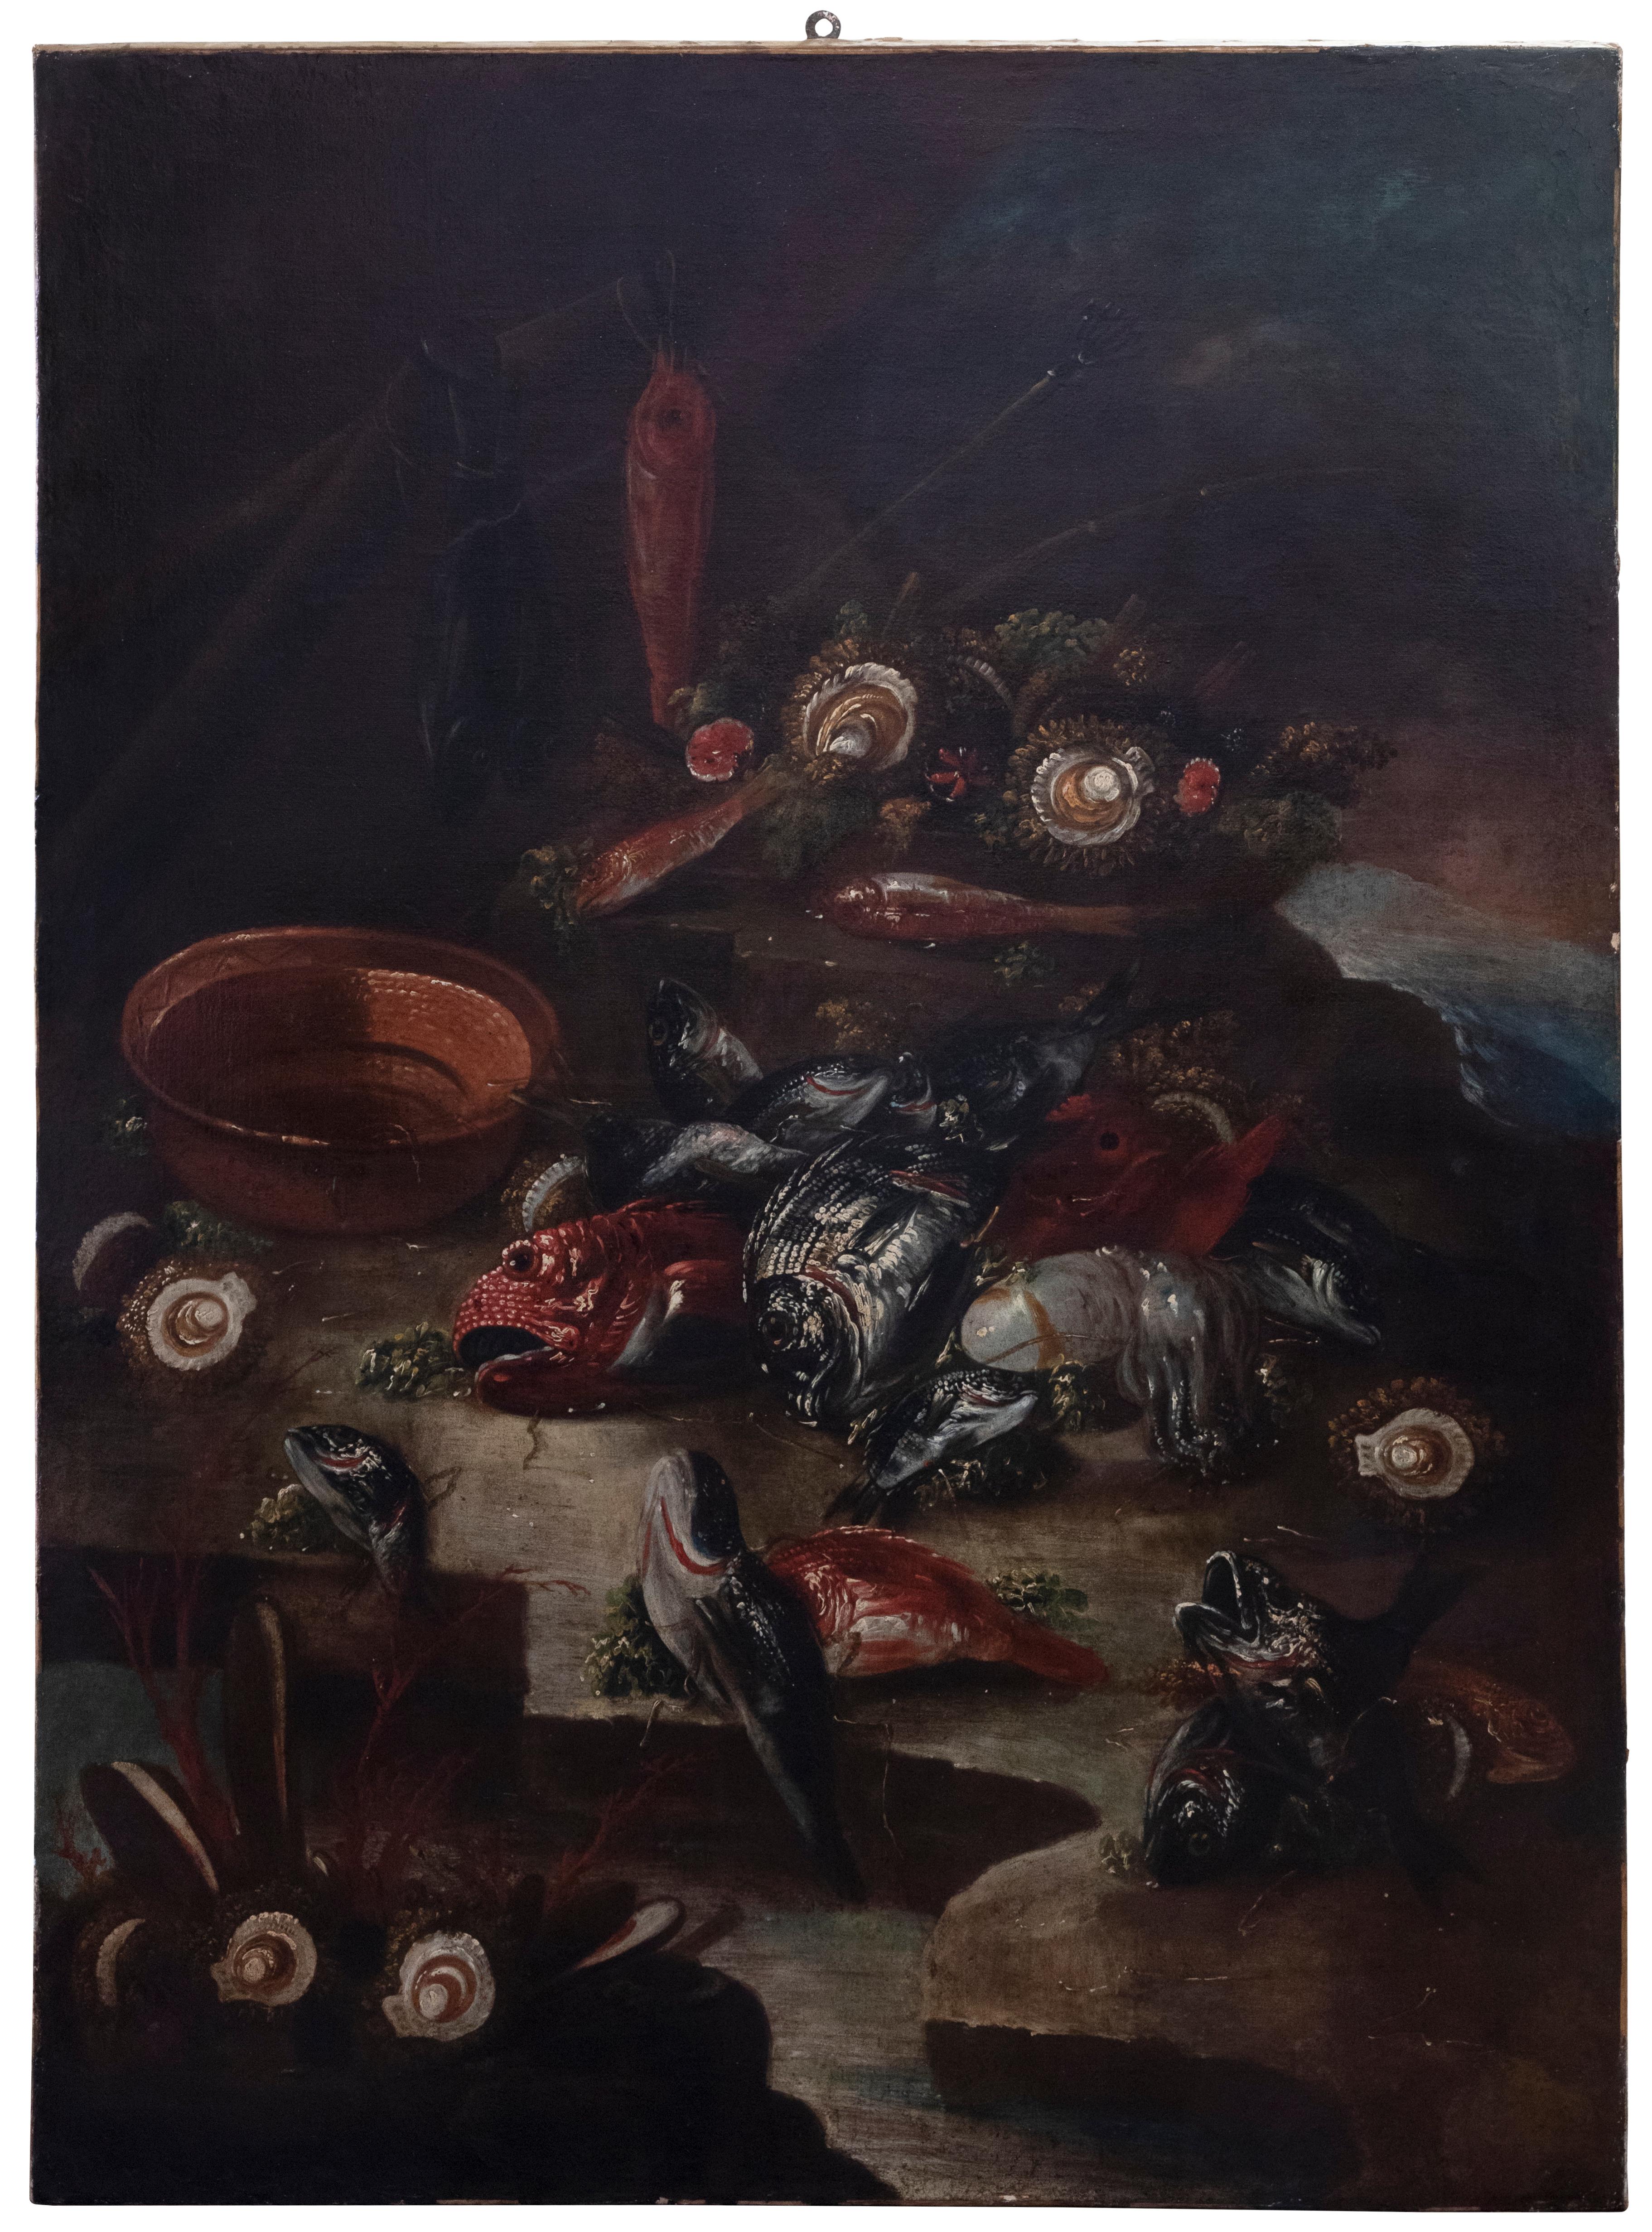 Unknown Figurative Painting - Still Life with Fishes and Oysters - Oil on Canvas - 17th Century